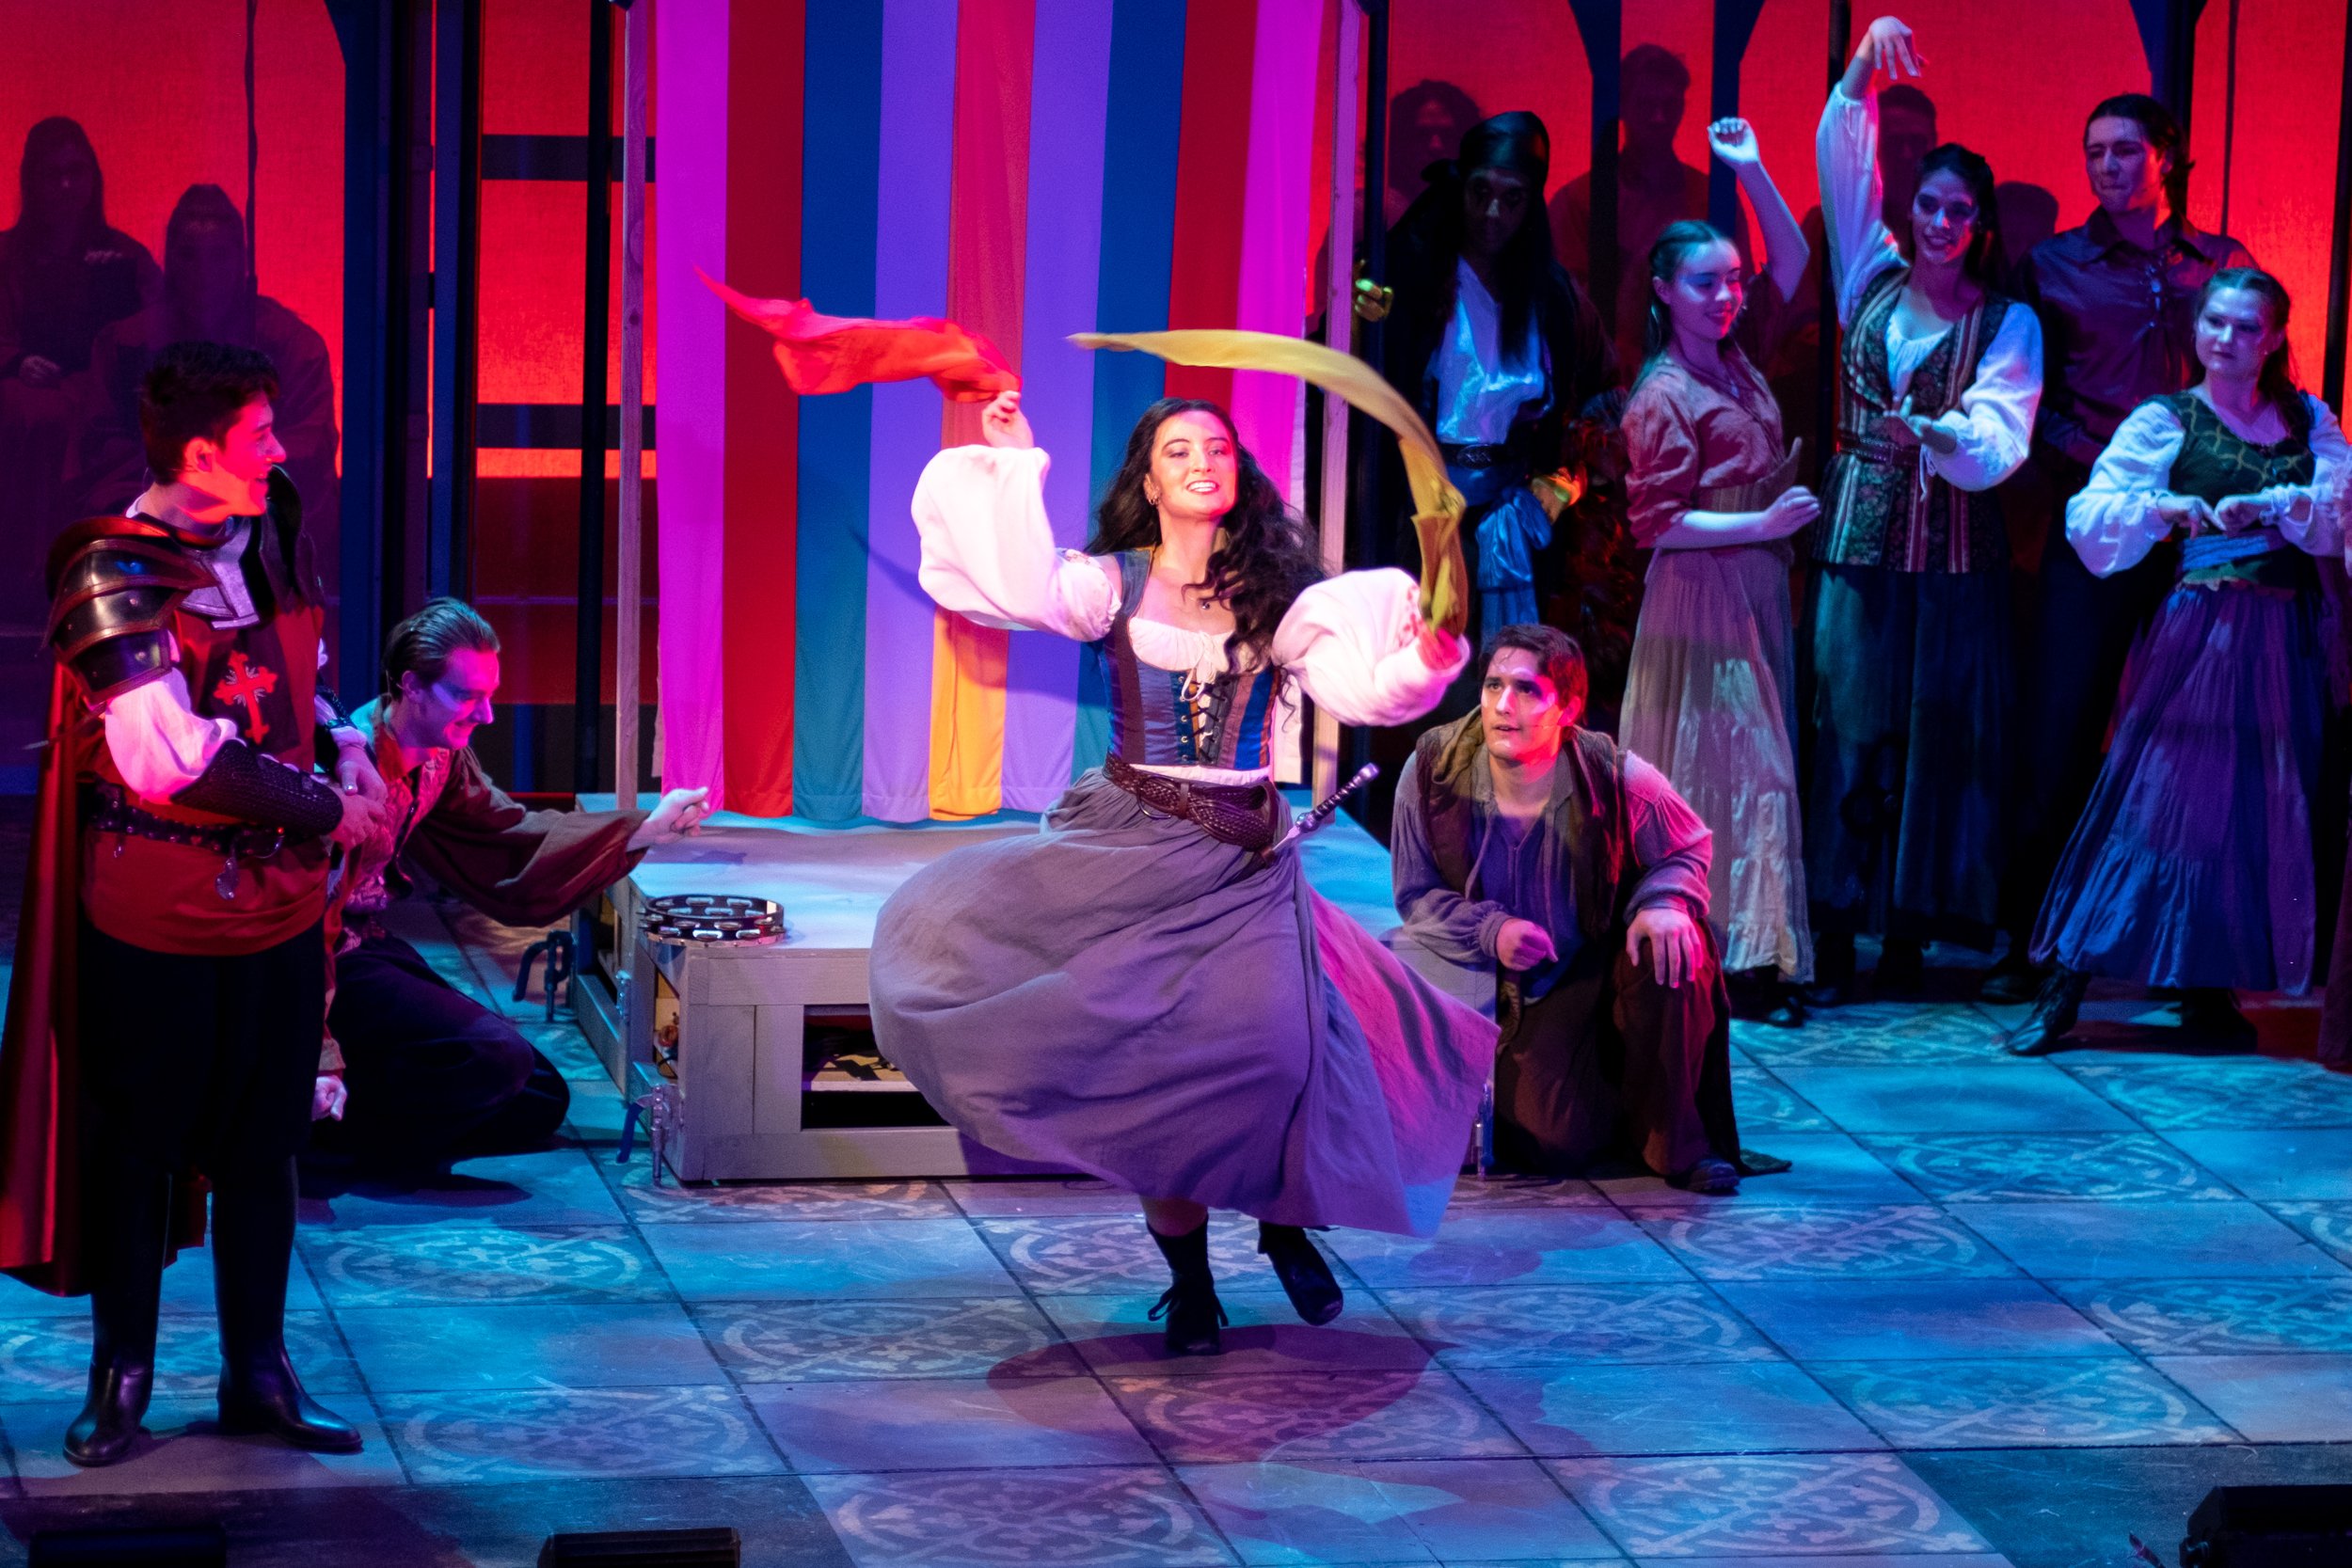  Esmeralda, played by Tayla Sindel, dances with scarves, mesmerizing her audience, in the musical production, The Hunchback of Notre Dame, during rehearsal on Thursday, March 30, 2023 at Santa Monica College Theare Arts and Music Departments Main Sta